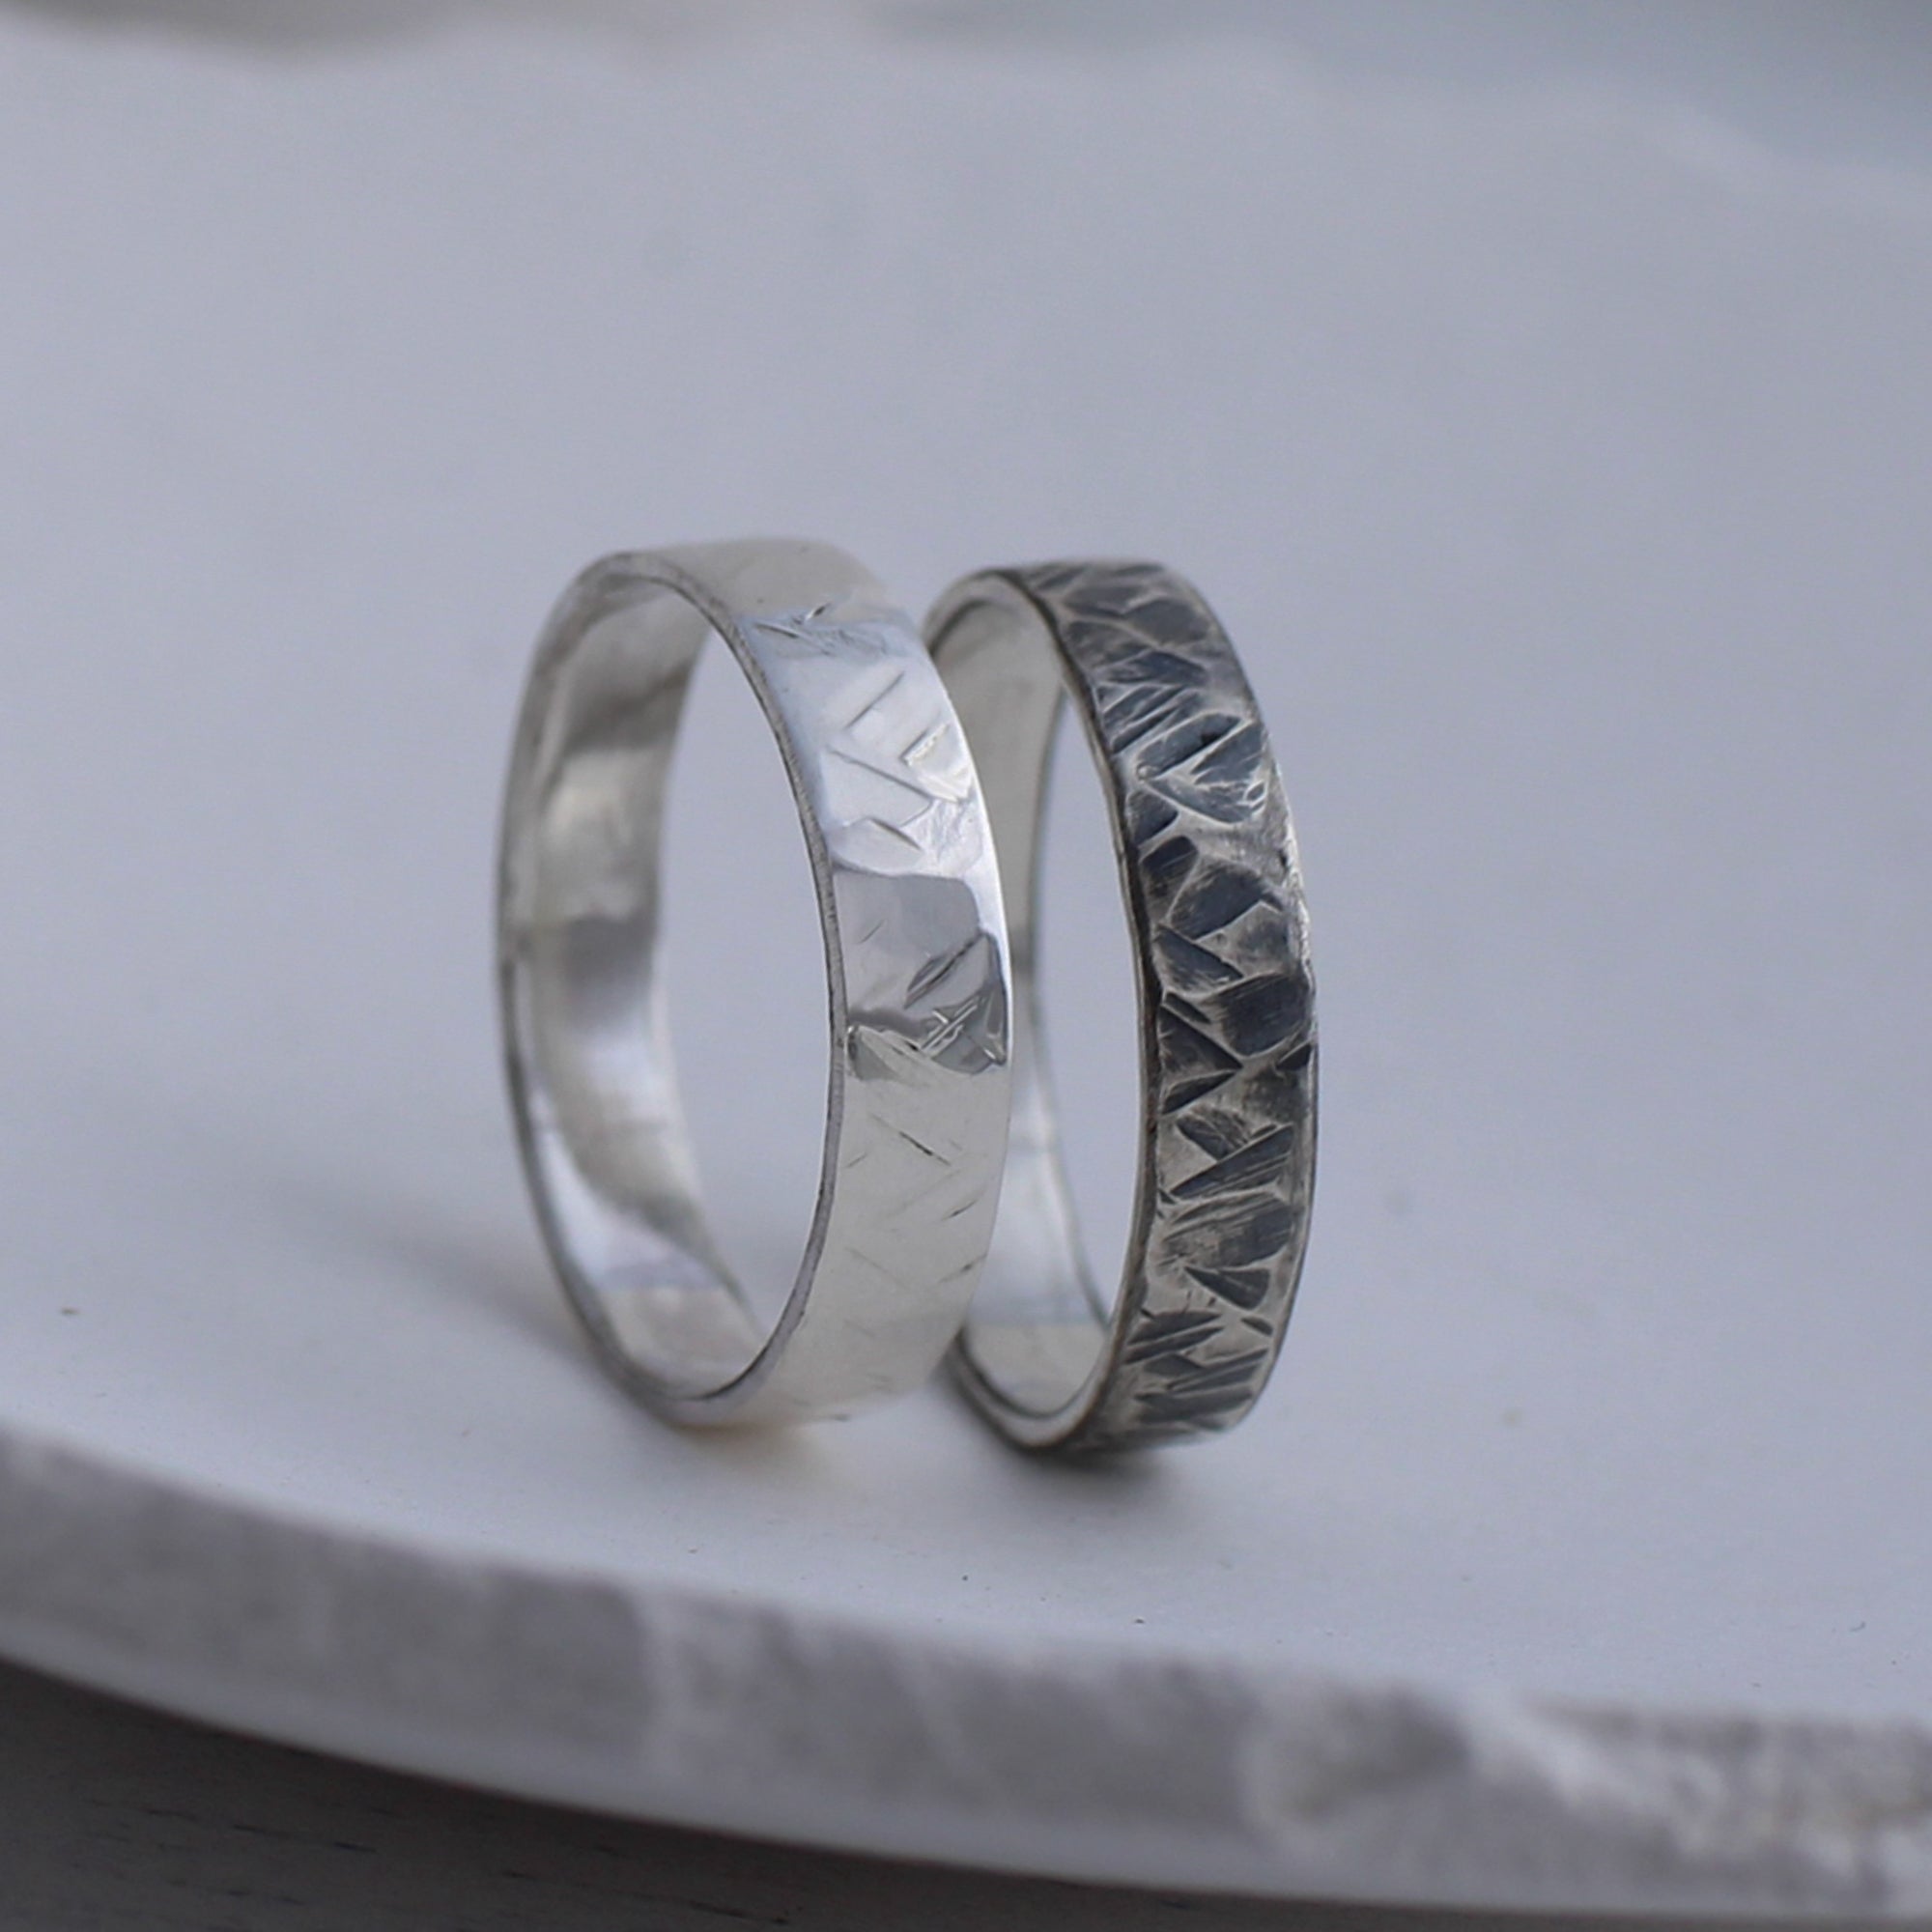 Checked texture silver rings